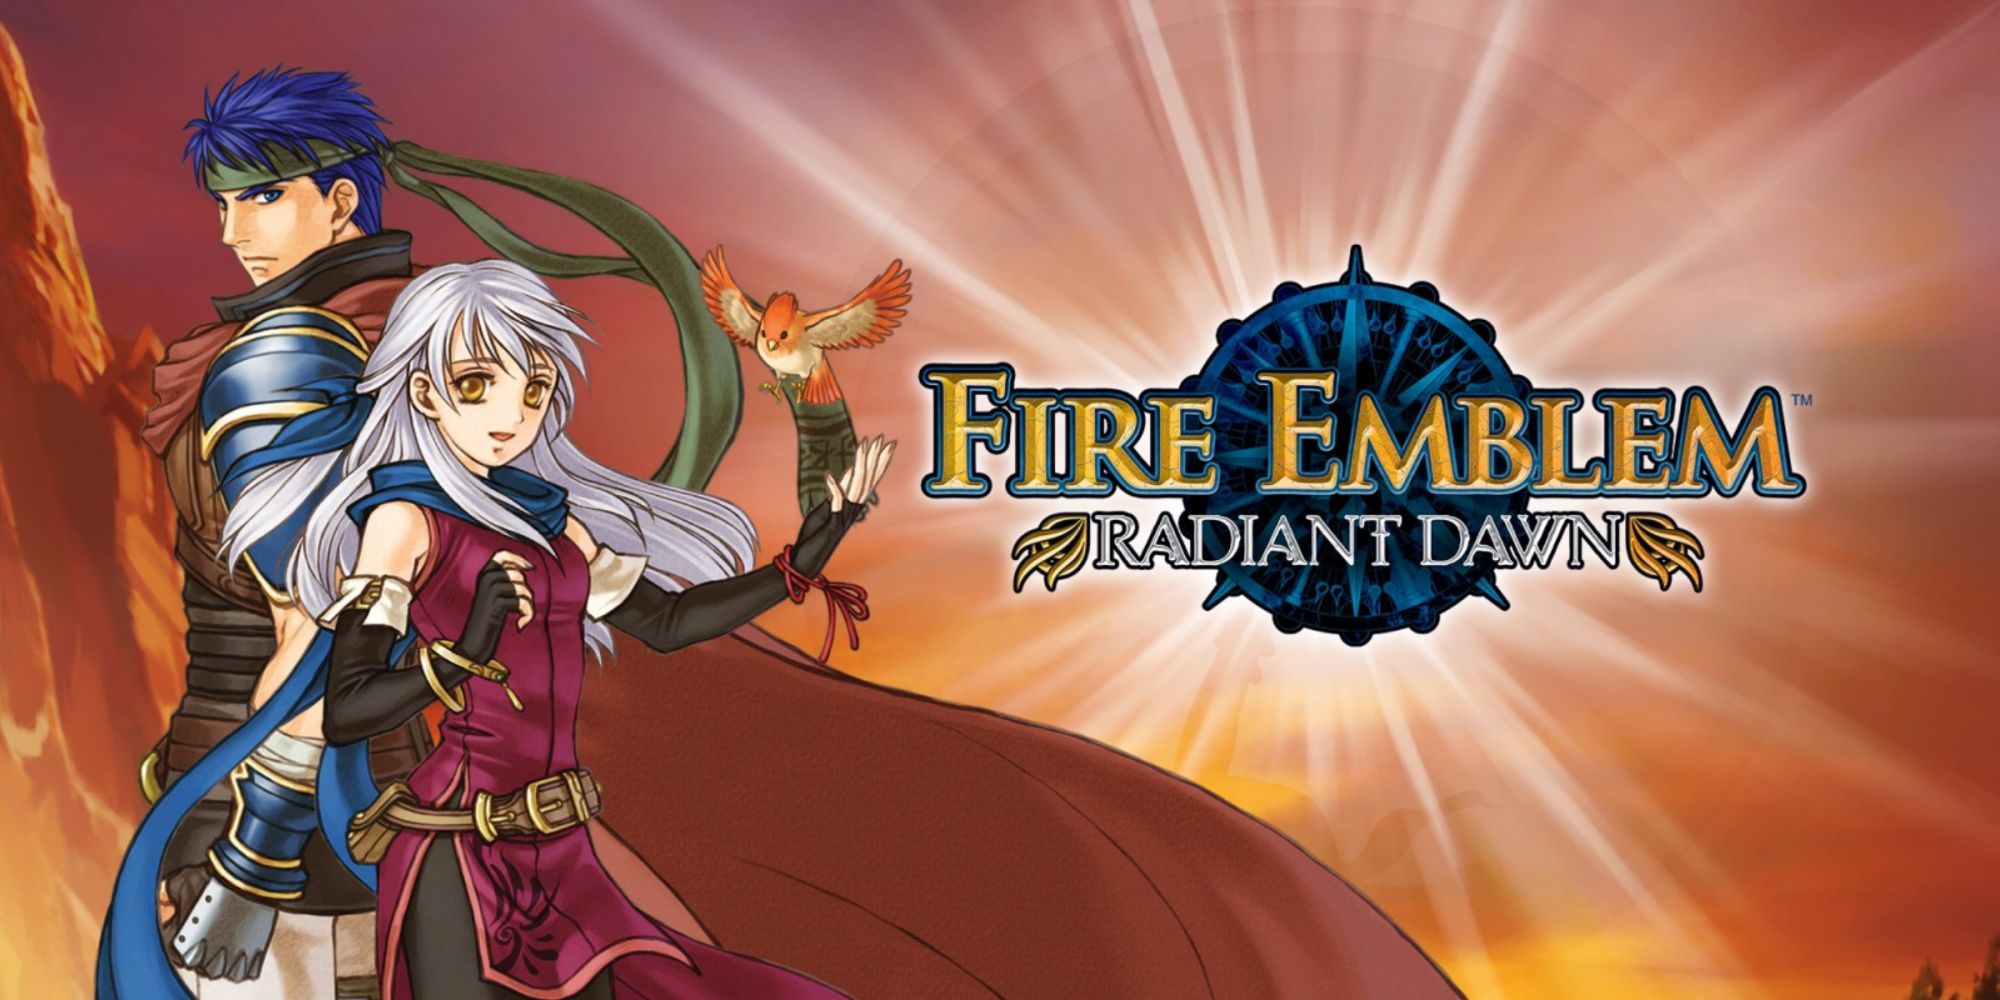 Promo art featuring characters in Fire Emblem Radiant Dawn